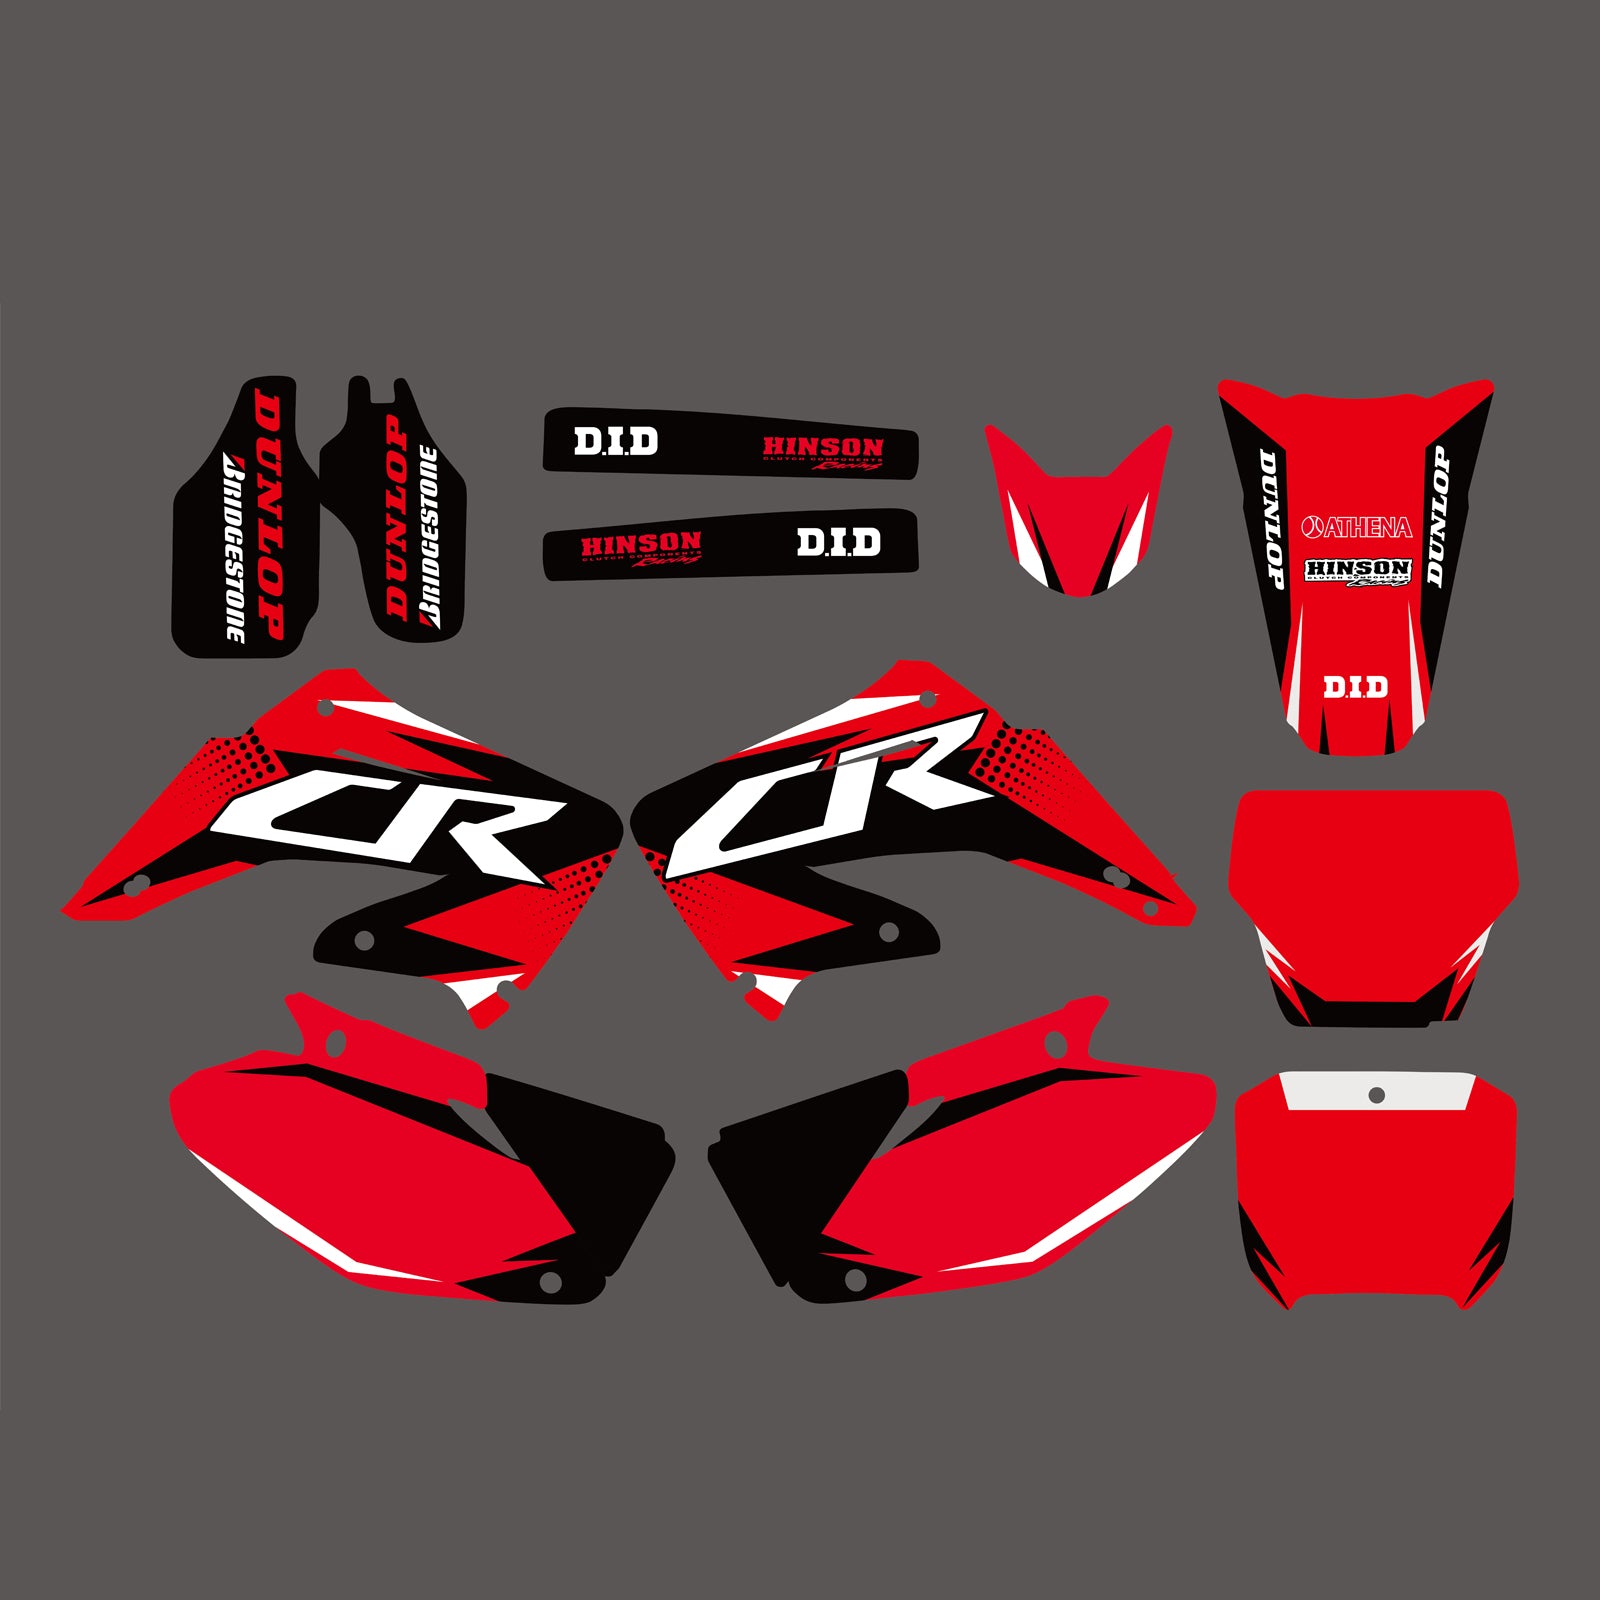 Team Graphics Background Sticker Decal Kits for Honda CR125/CR250 2002-2012